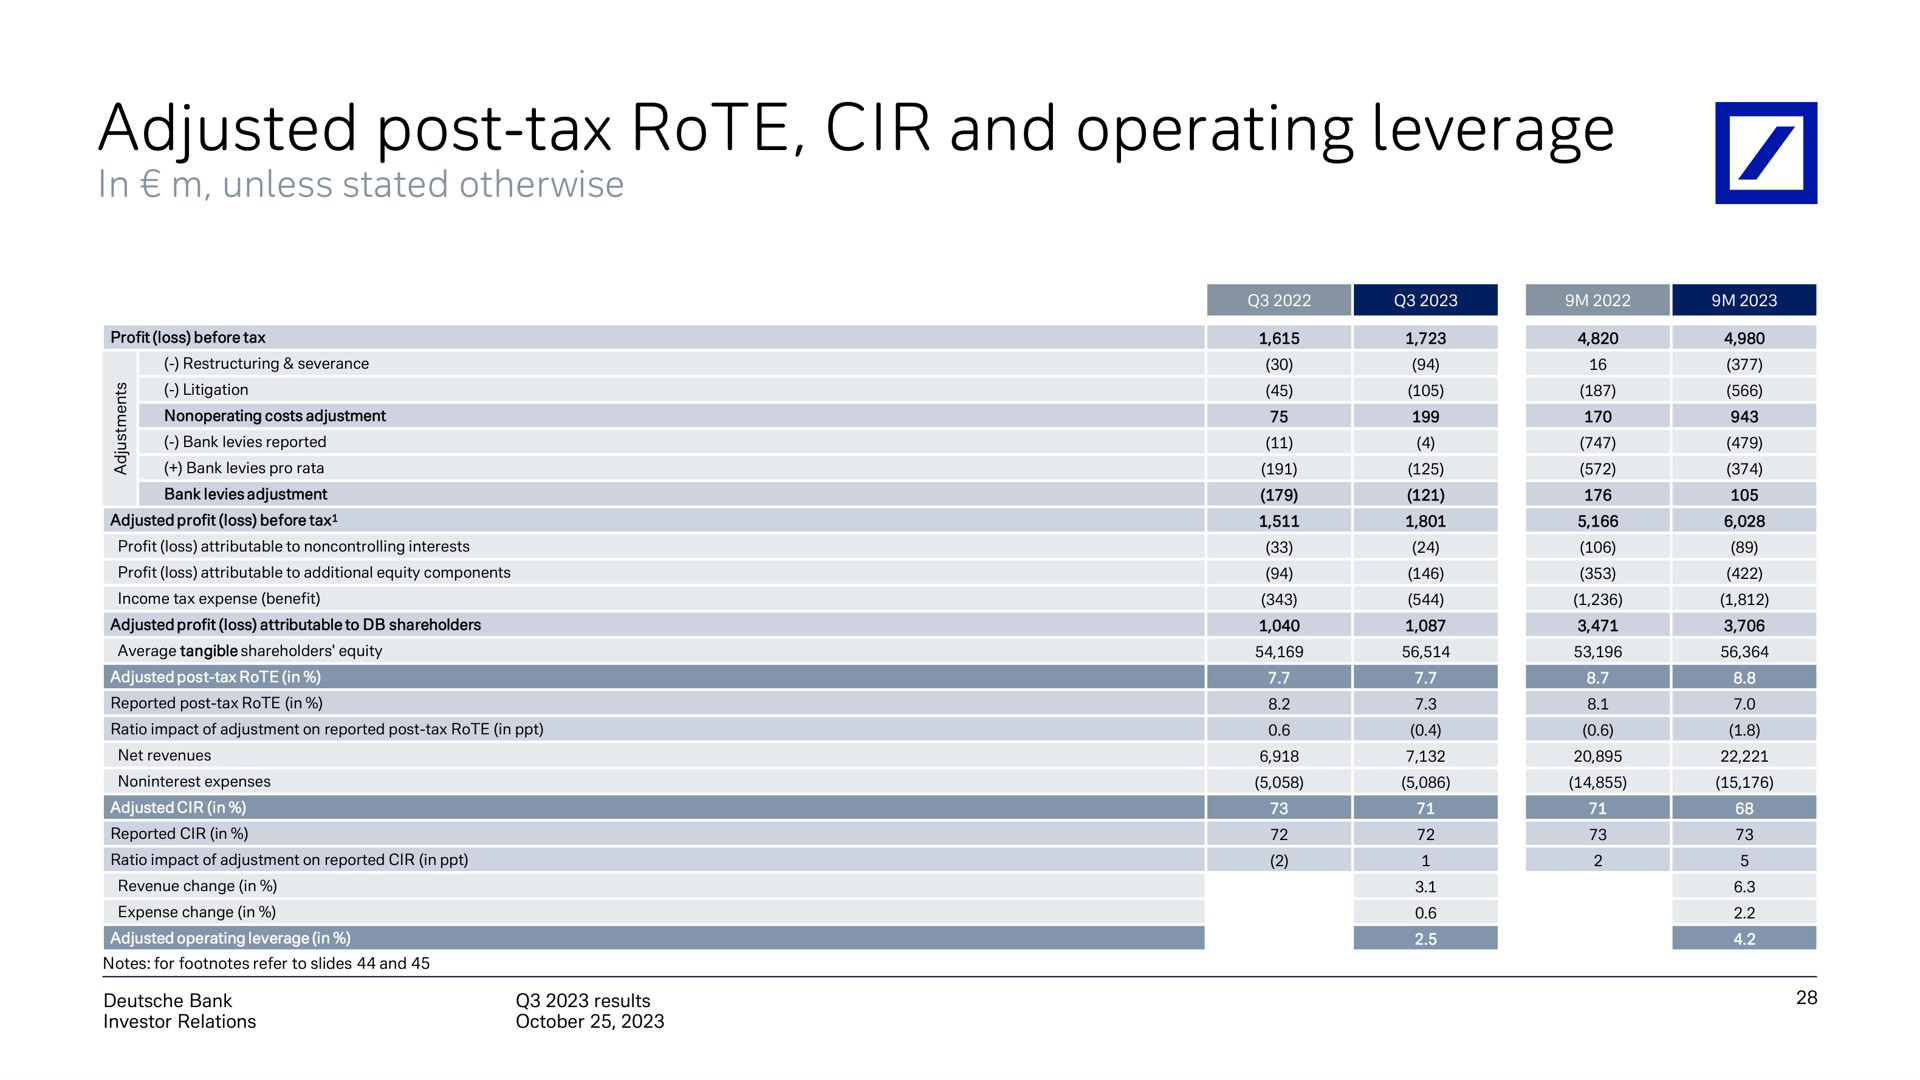 adjusted post tax rote and operating leverage | Deutsche Bank